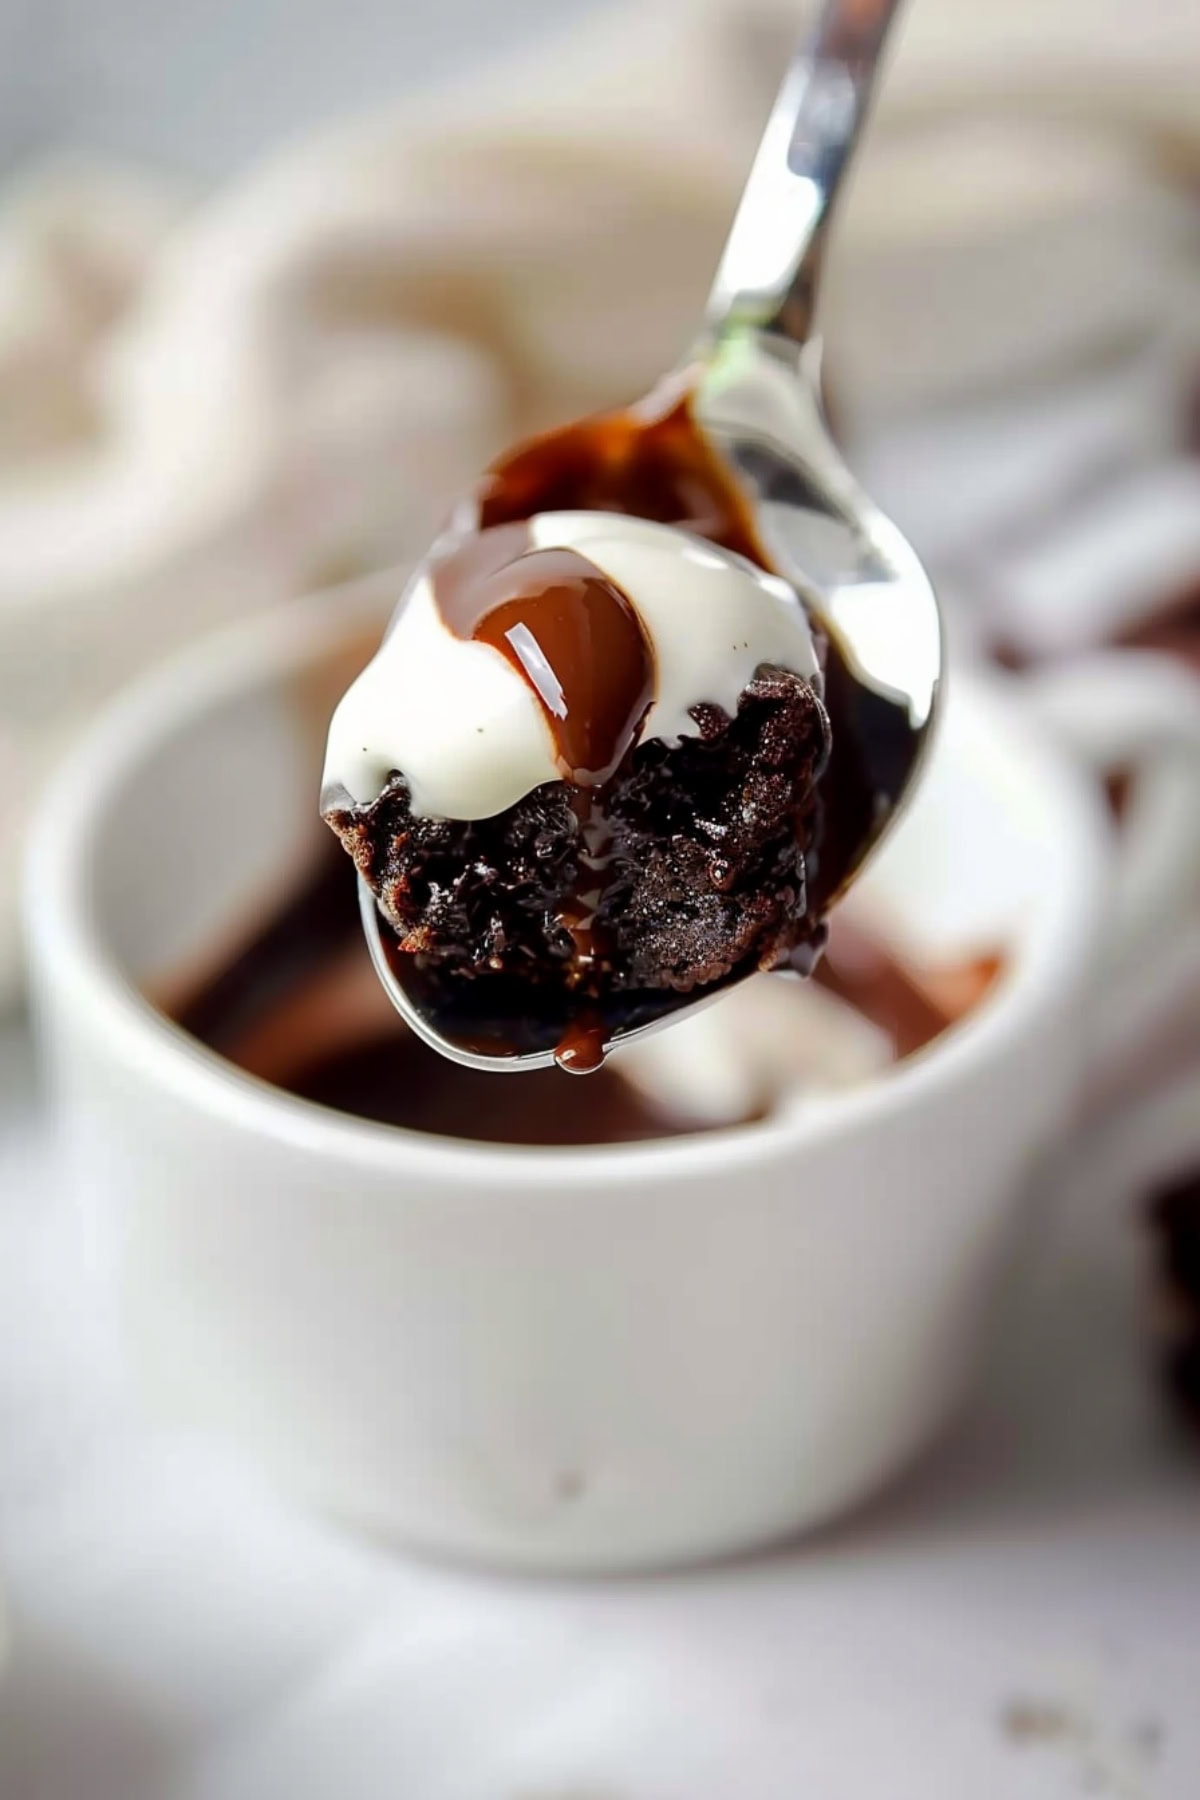 Close-up shot of a spoonful of hot chocolate mug cake with ice cream and chocolate sauce on top.